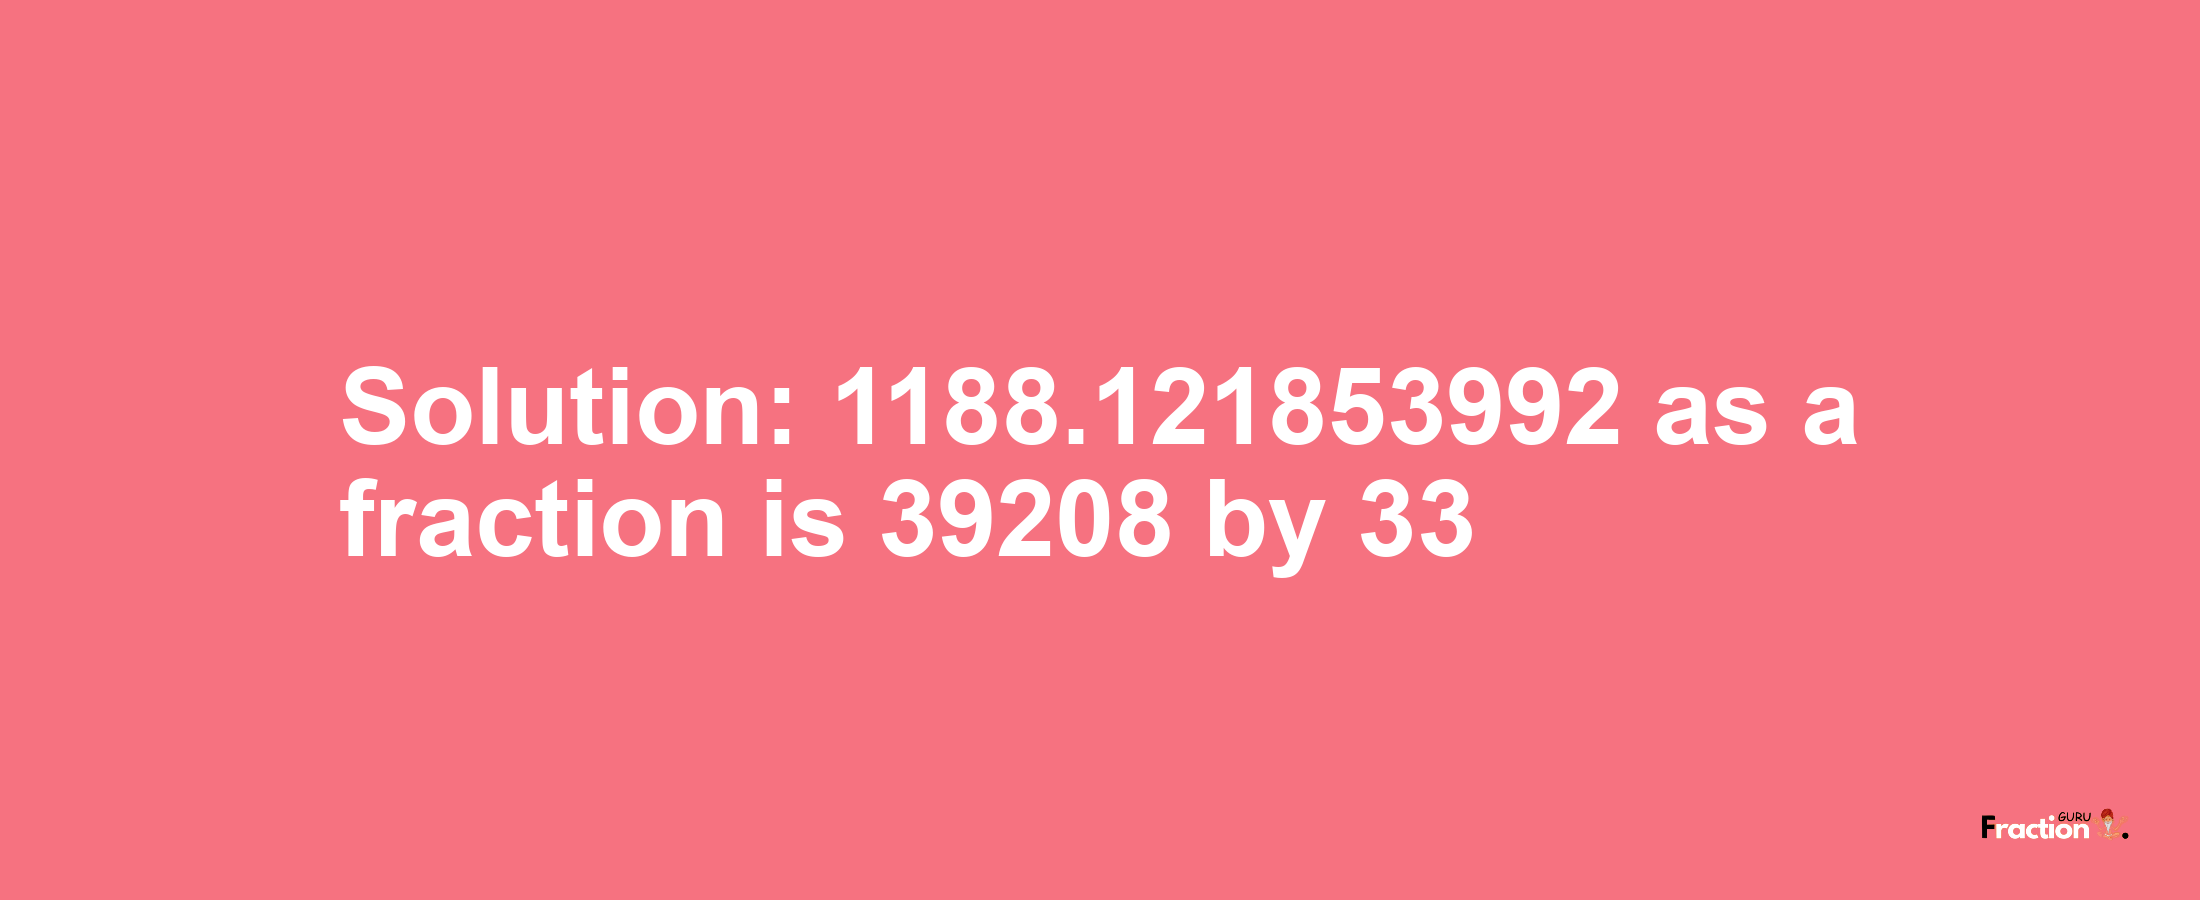 Solution:1188.121853992 as a fraction is 39208/33